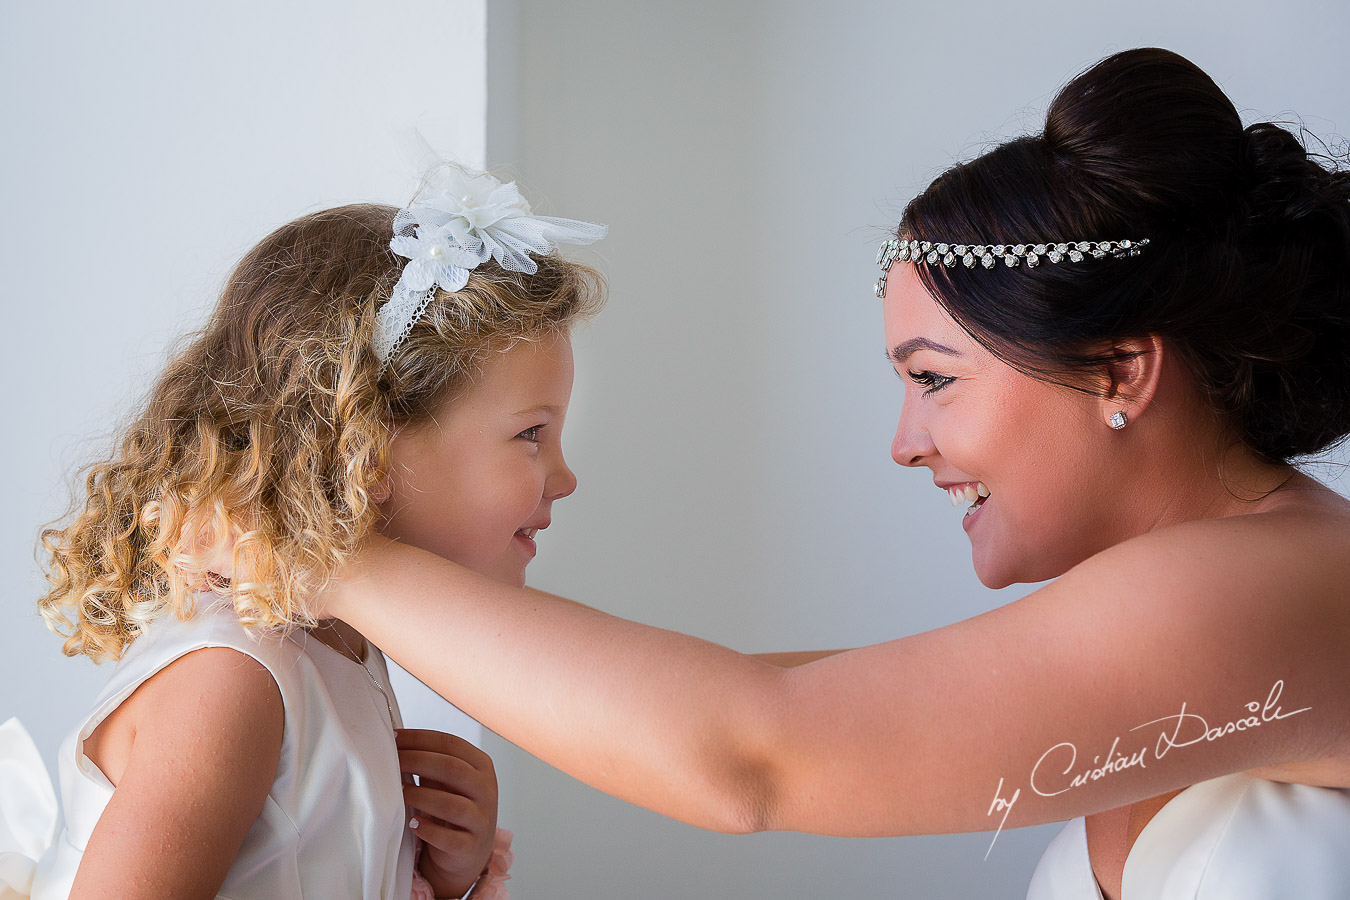 Beautiful bride Amy & her daughter Eva posing before her wedding ceremony at King Evelton Beach and Resort.